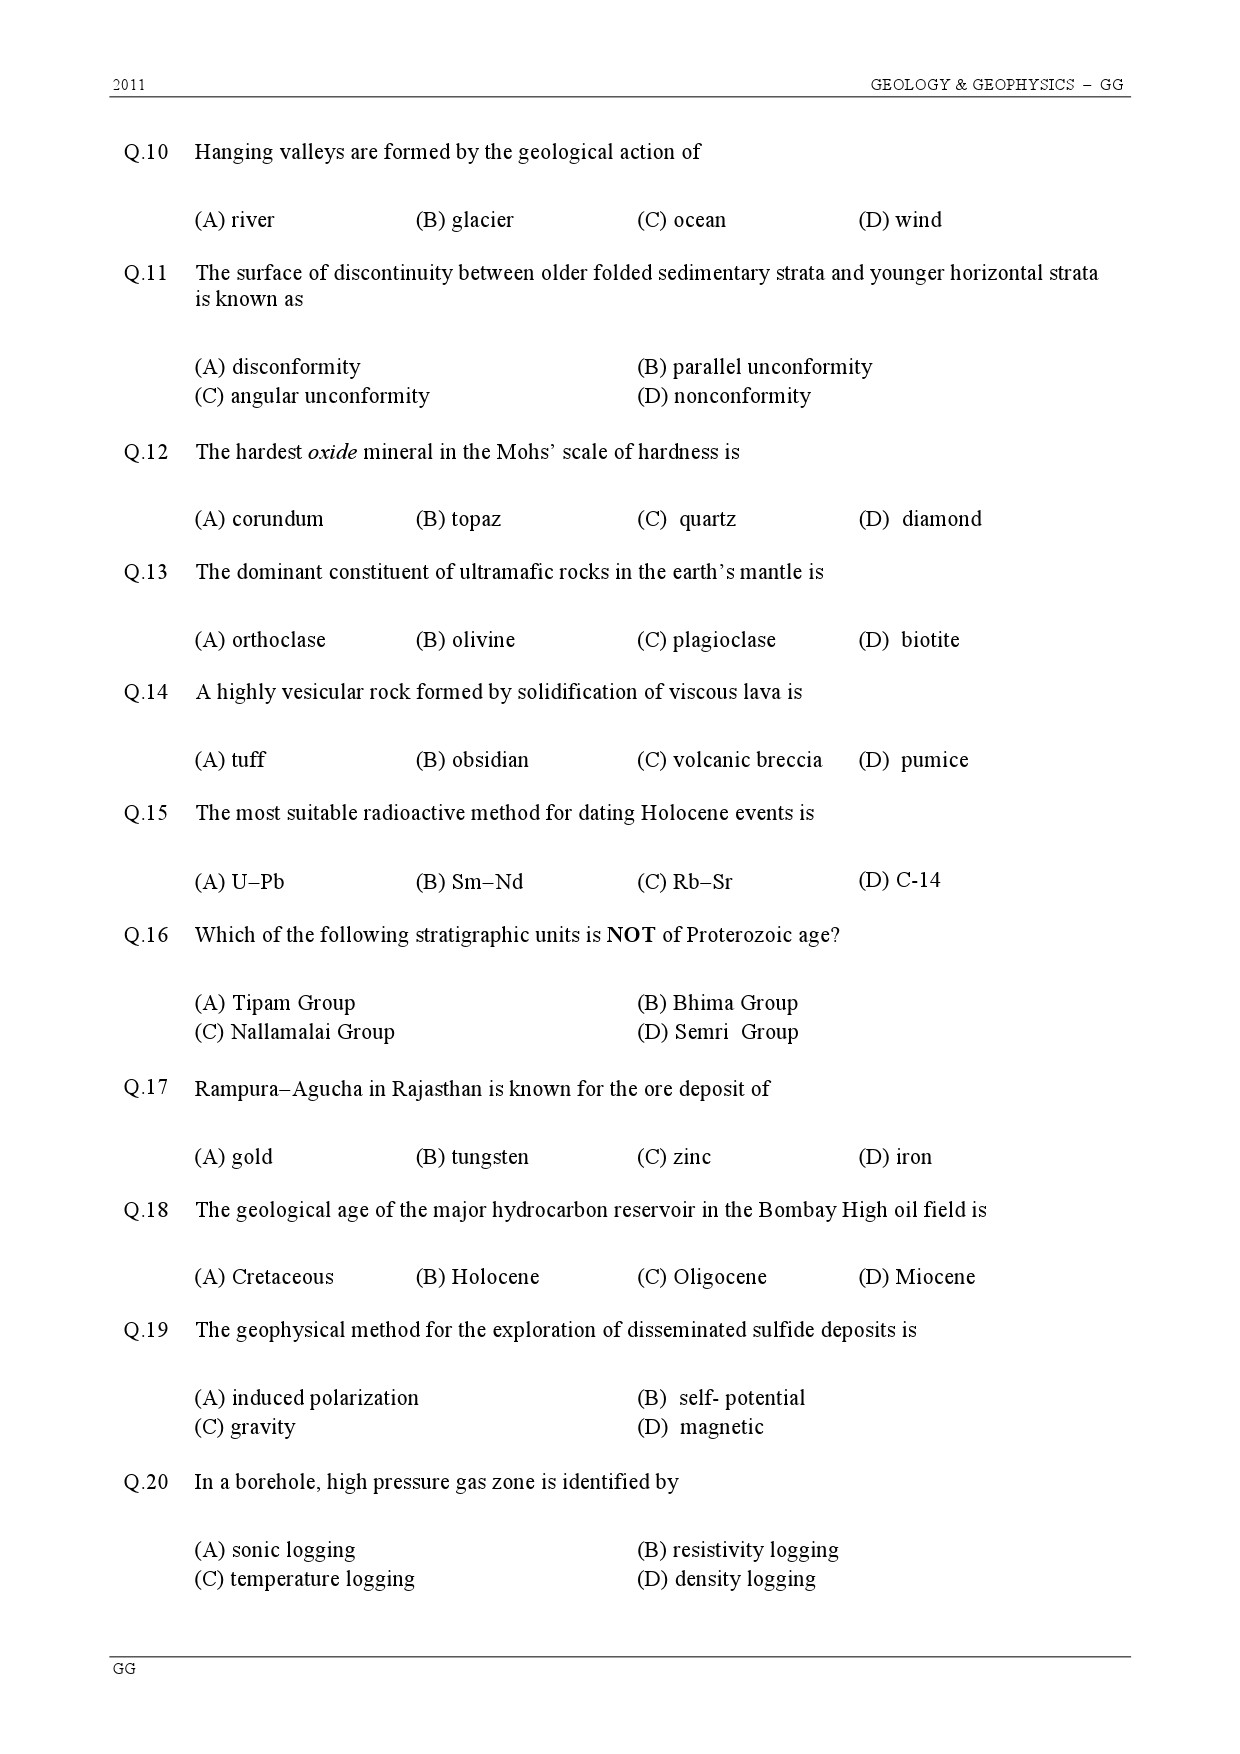 GATE Exam Question Paper 2011 Geology and Geophysics 3